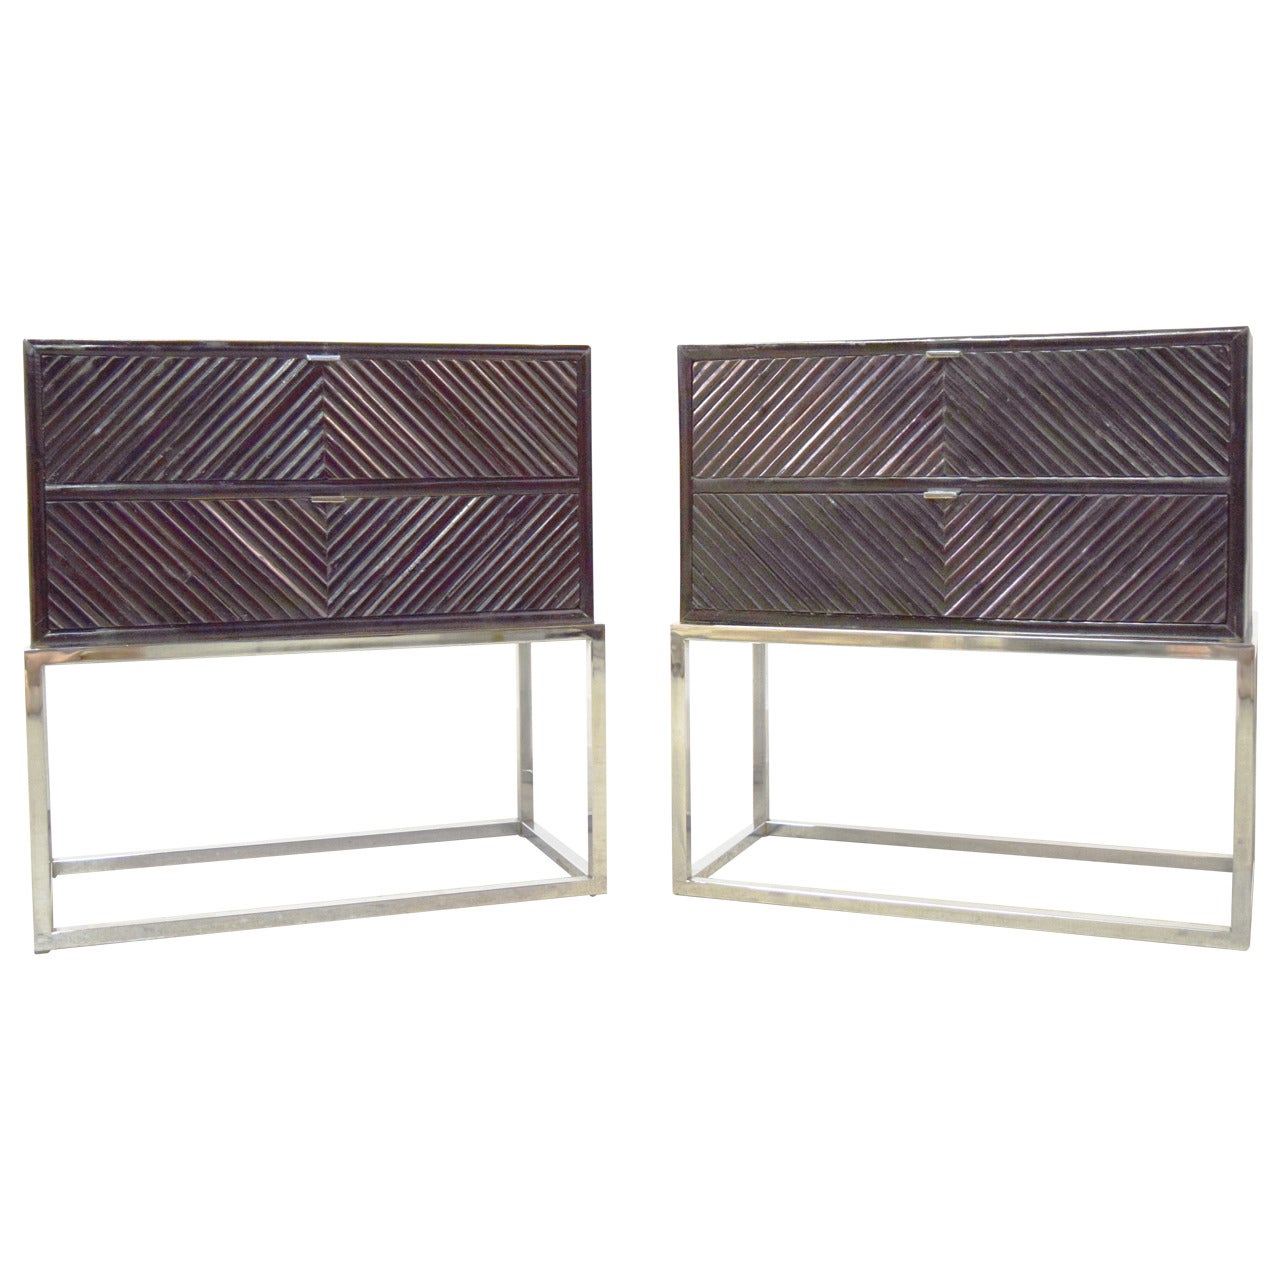 Pair of Milo Baughman Bamboo and Chrome End Tables/Nightstands